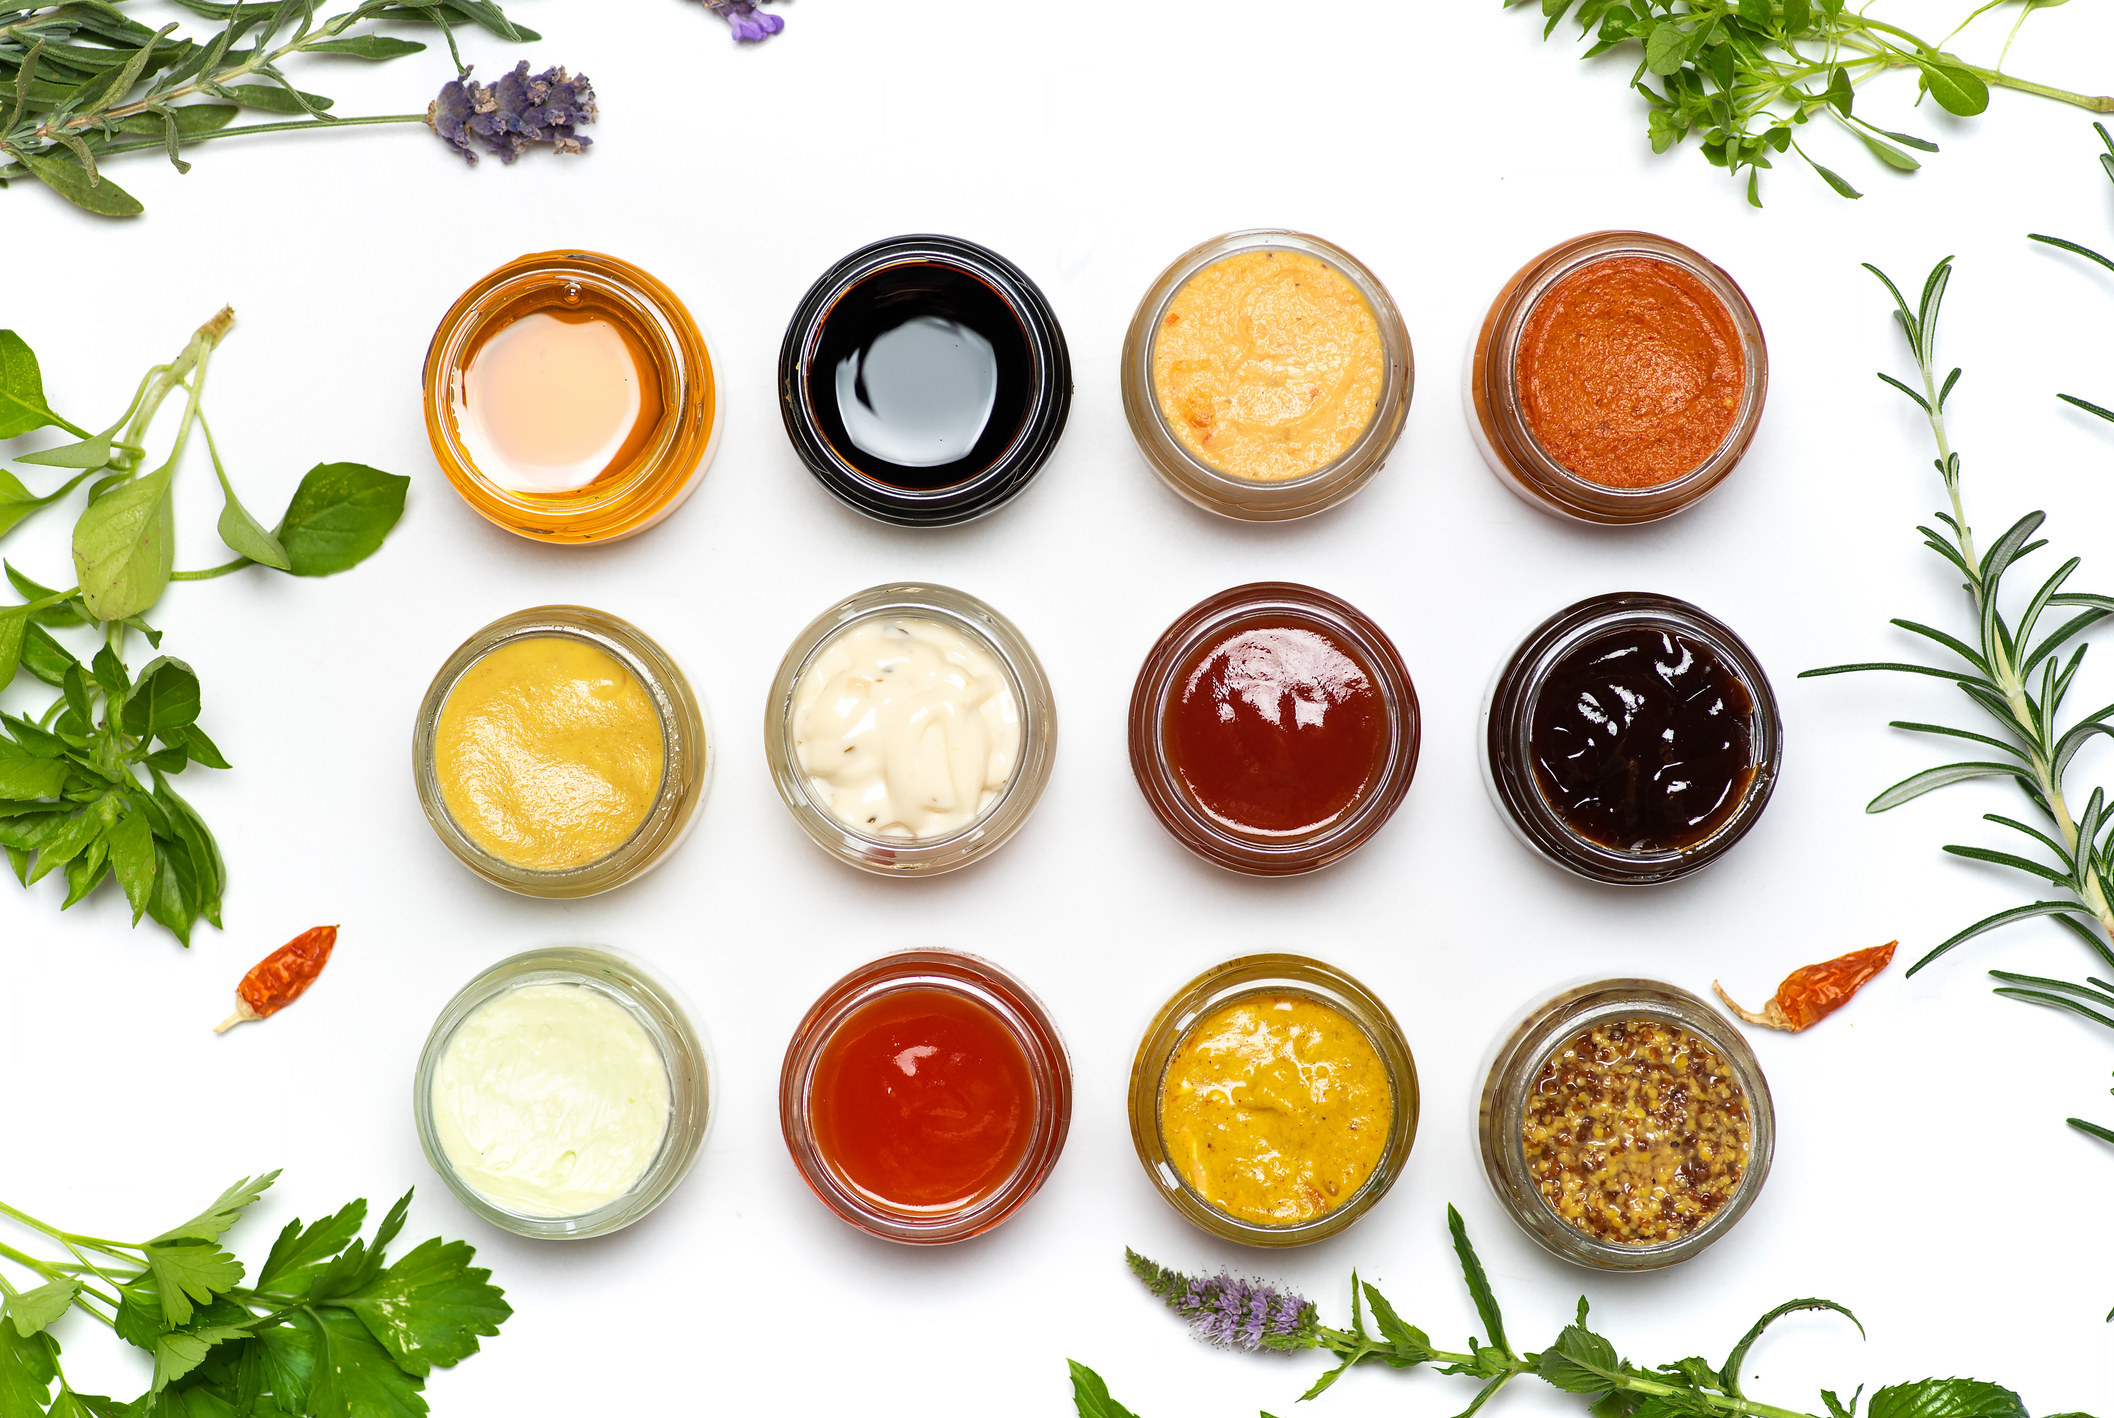 Twelve ramekins of various sauces arranged in rows with fresh herbs at the sides of the frame